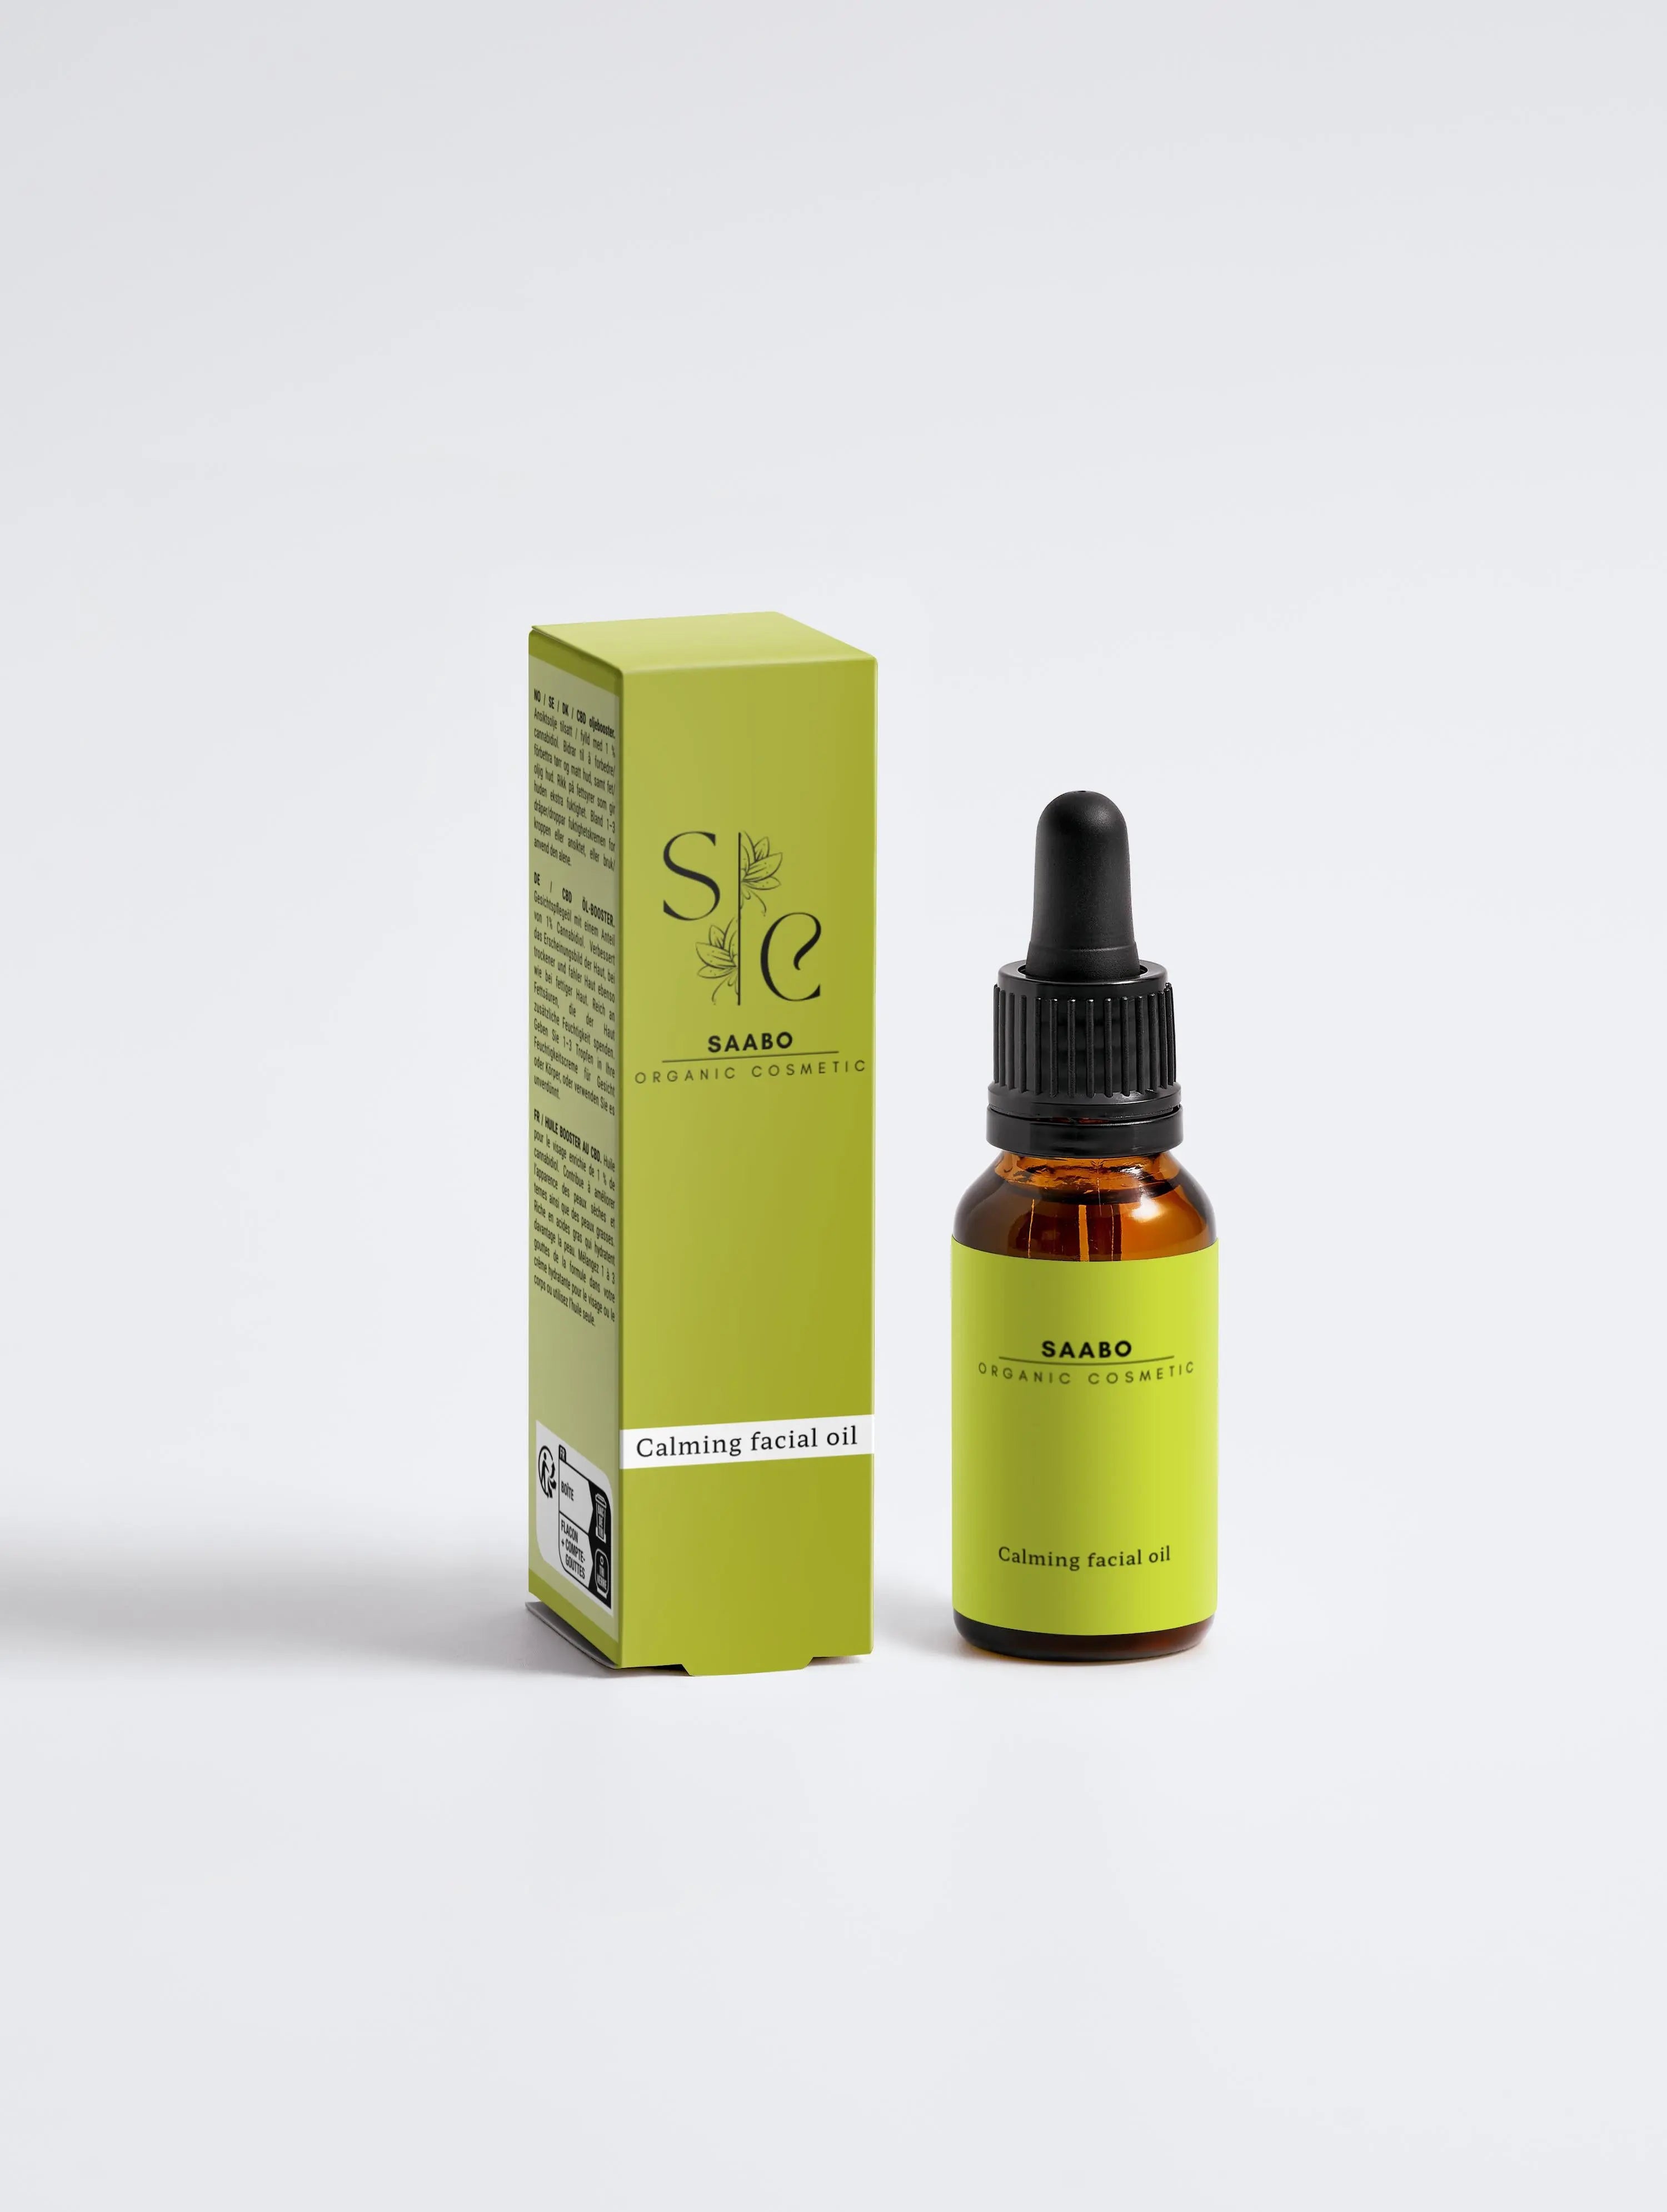 Soothing facial oil for intensive care with box